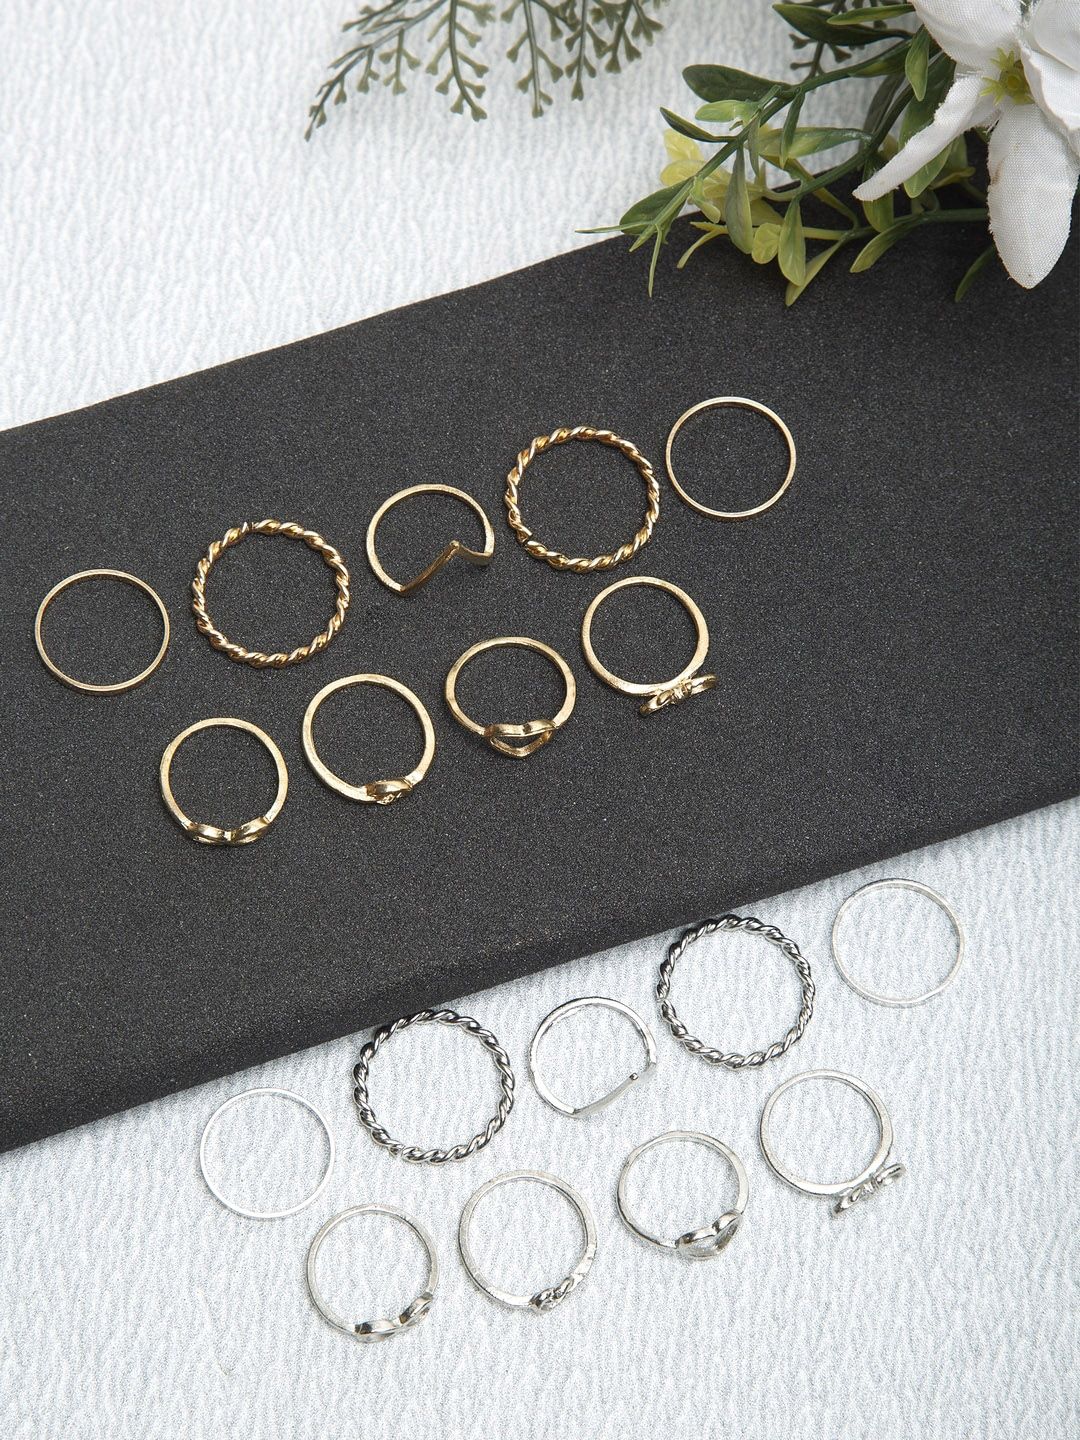 YouBella Set Of 18 Gold-Toned & Silver-Toned Textured Finger Rings Price in India